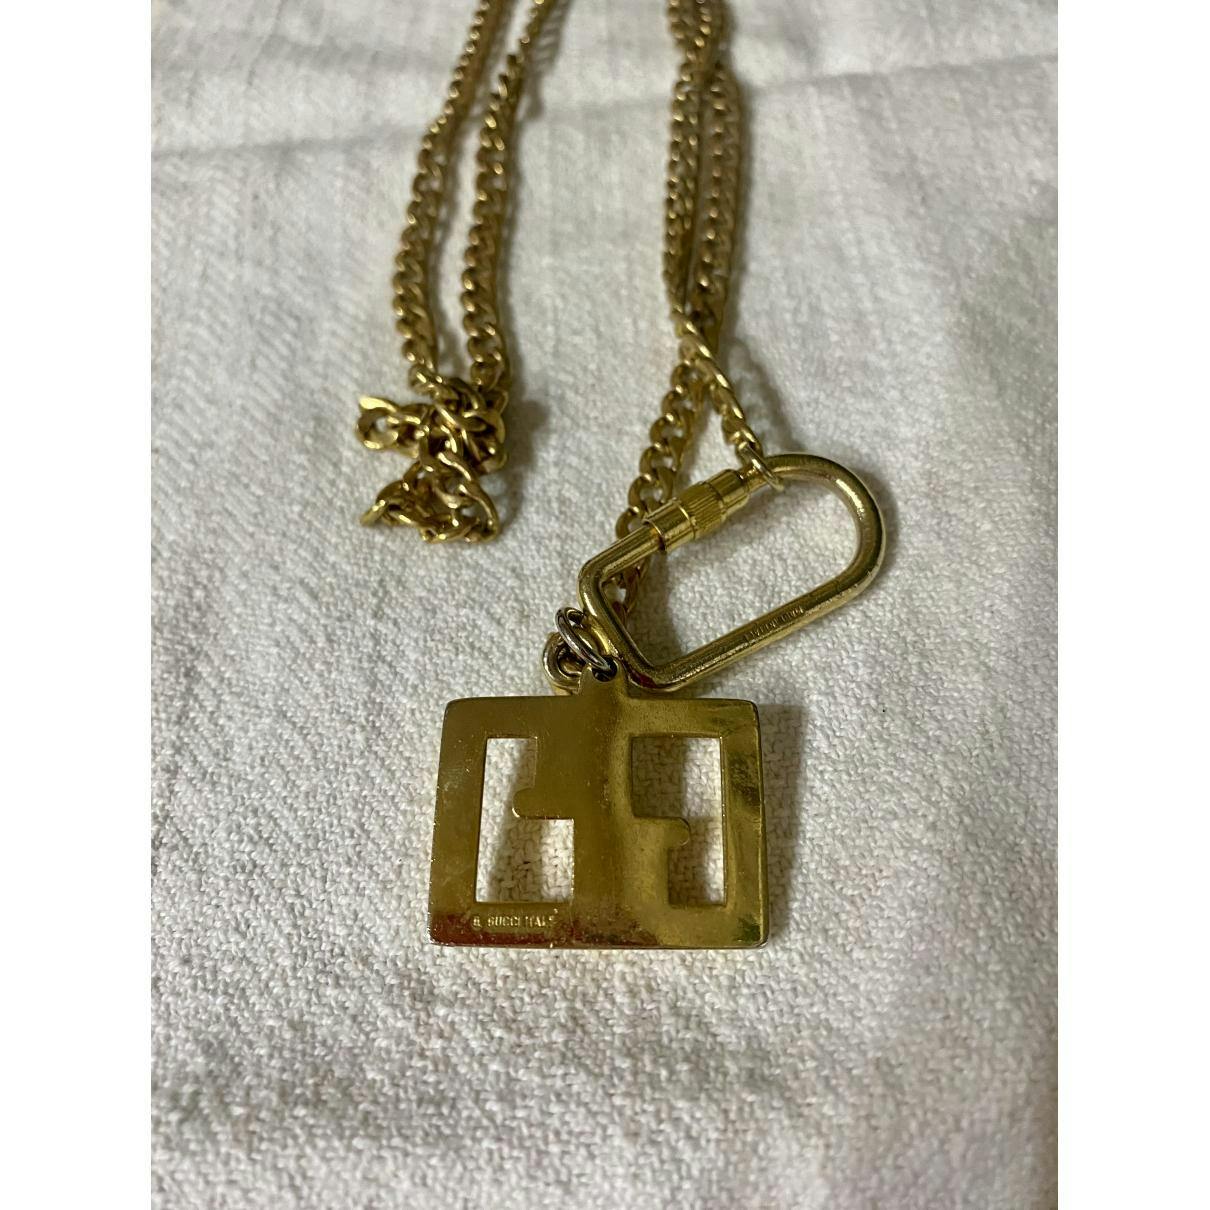 https://images.vestiairecollective.com/cdn-cgi/image/q=75,f=auto,/produit/gold-gold-plated-gg-running-gucci-necklace-35343107-3_2.jpg?secret=VC-e9eee96a-a819-4431-ad12-d066be2626ef